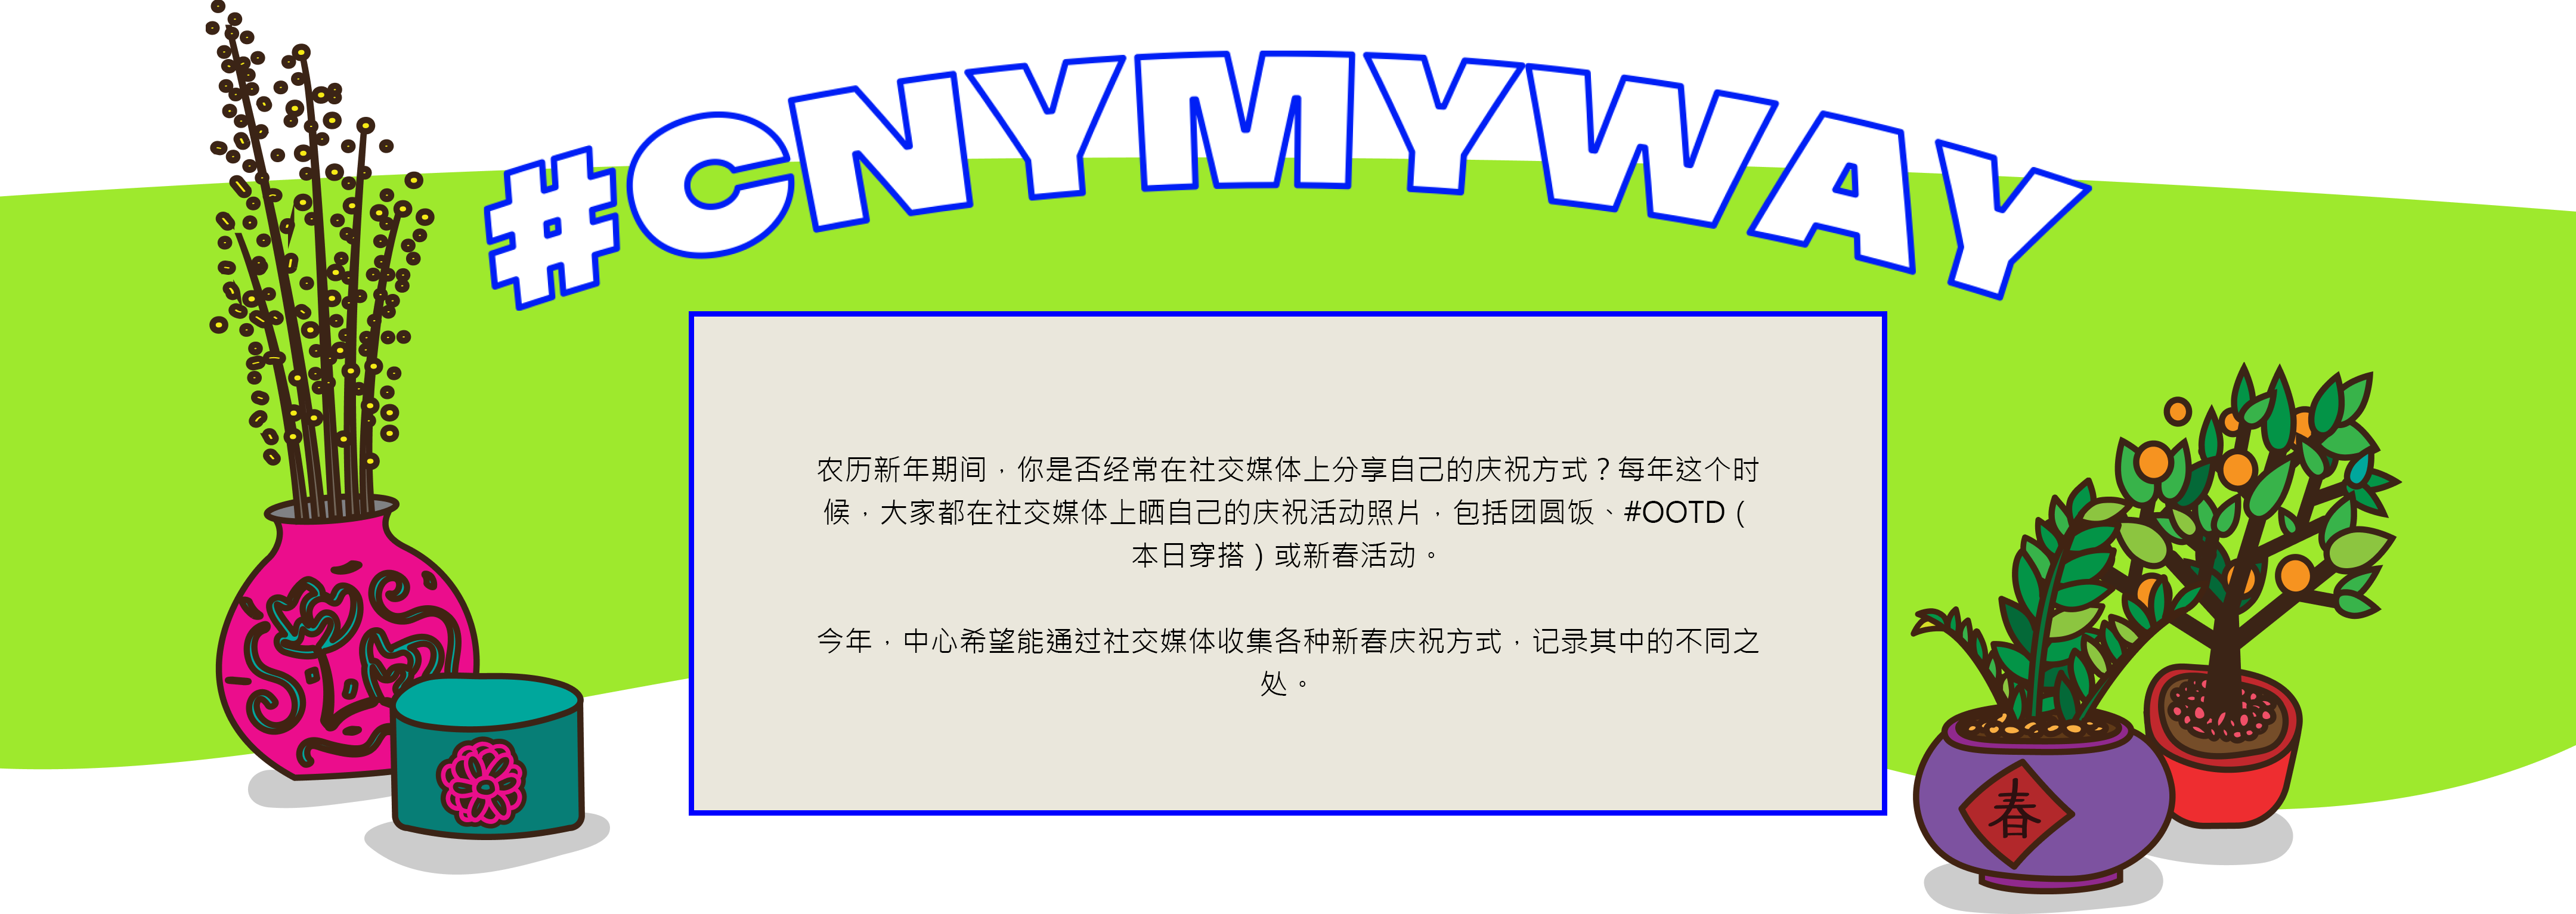 cnymyway